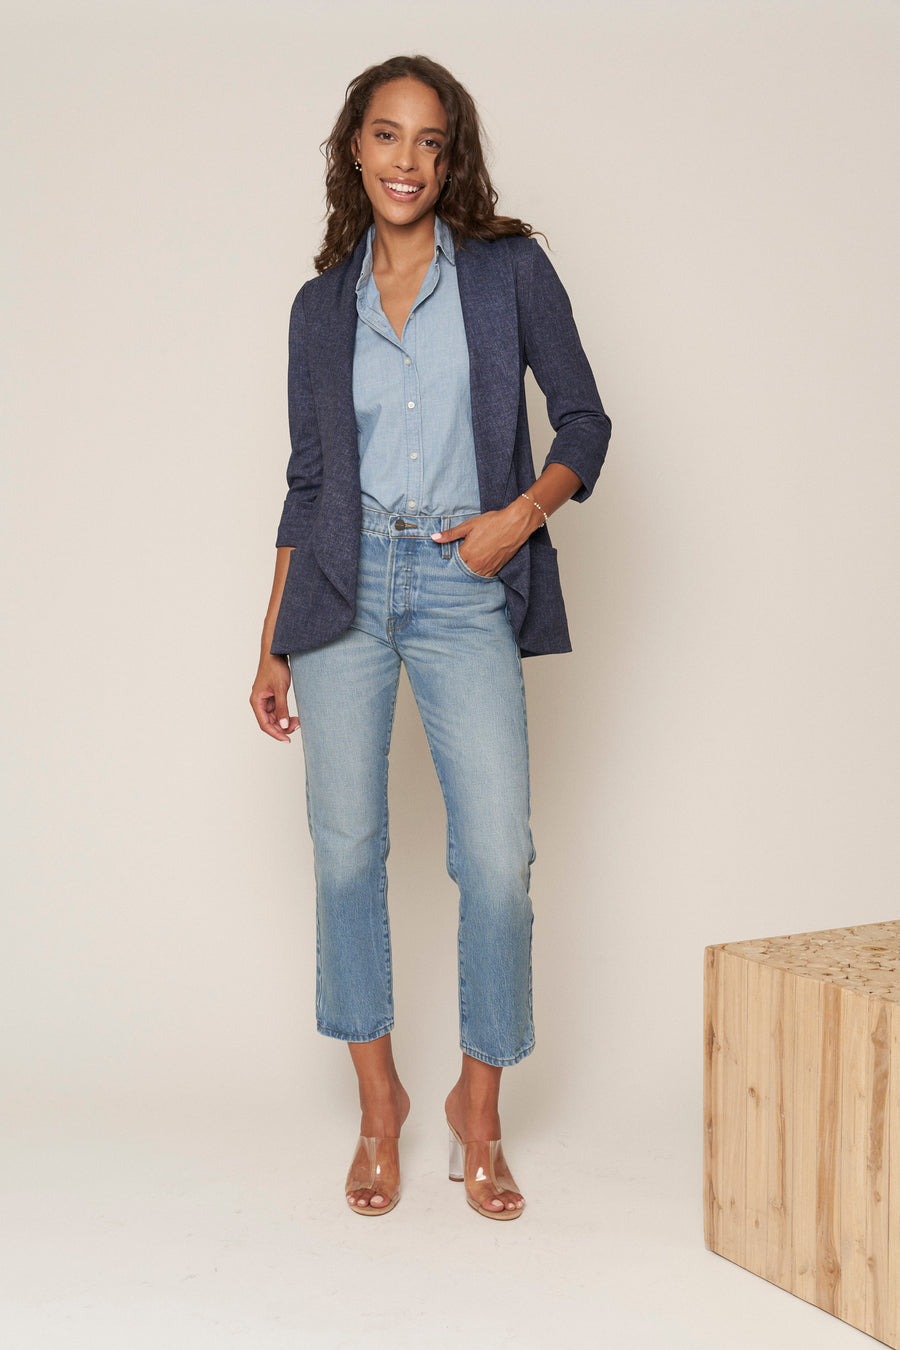 No Srcipt image - Images of 1 of 7 Classic Melanie Shawl Simple Staple Taupe Neutral Color Workwear Office Wear Women’s Outerwear Blazer Jacket Everyday Shawl Front Pockets Best Seller Customer Favorite Casual Style Everyday Jacket Indigo Denim Fabric Structured Material